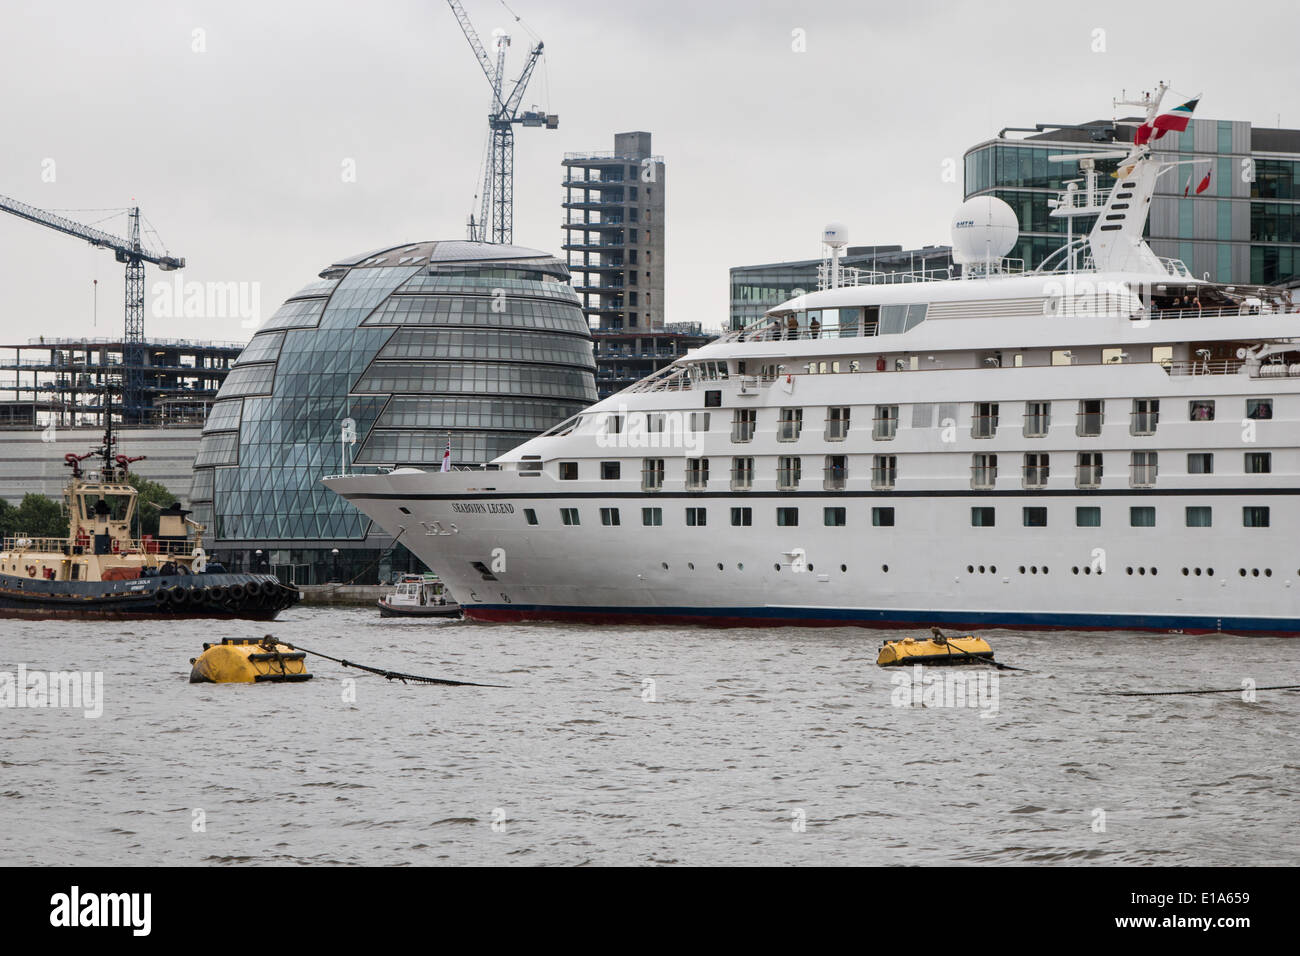 LONDON, UK, 28th May, 2014. The cruise ship Seabourn Legend passes City Hall on its way to moor alongside HMS Belfast on the Thames © Steve Bright/Alamy Live News Stock Photo